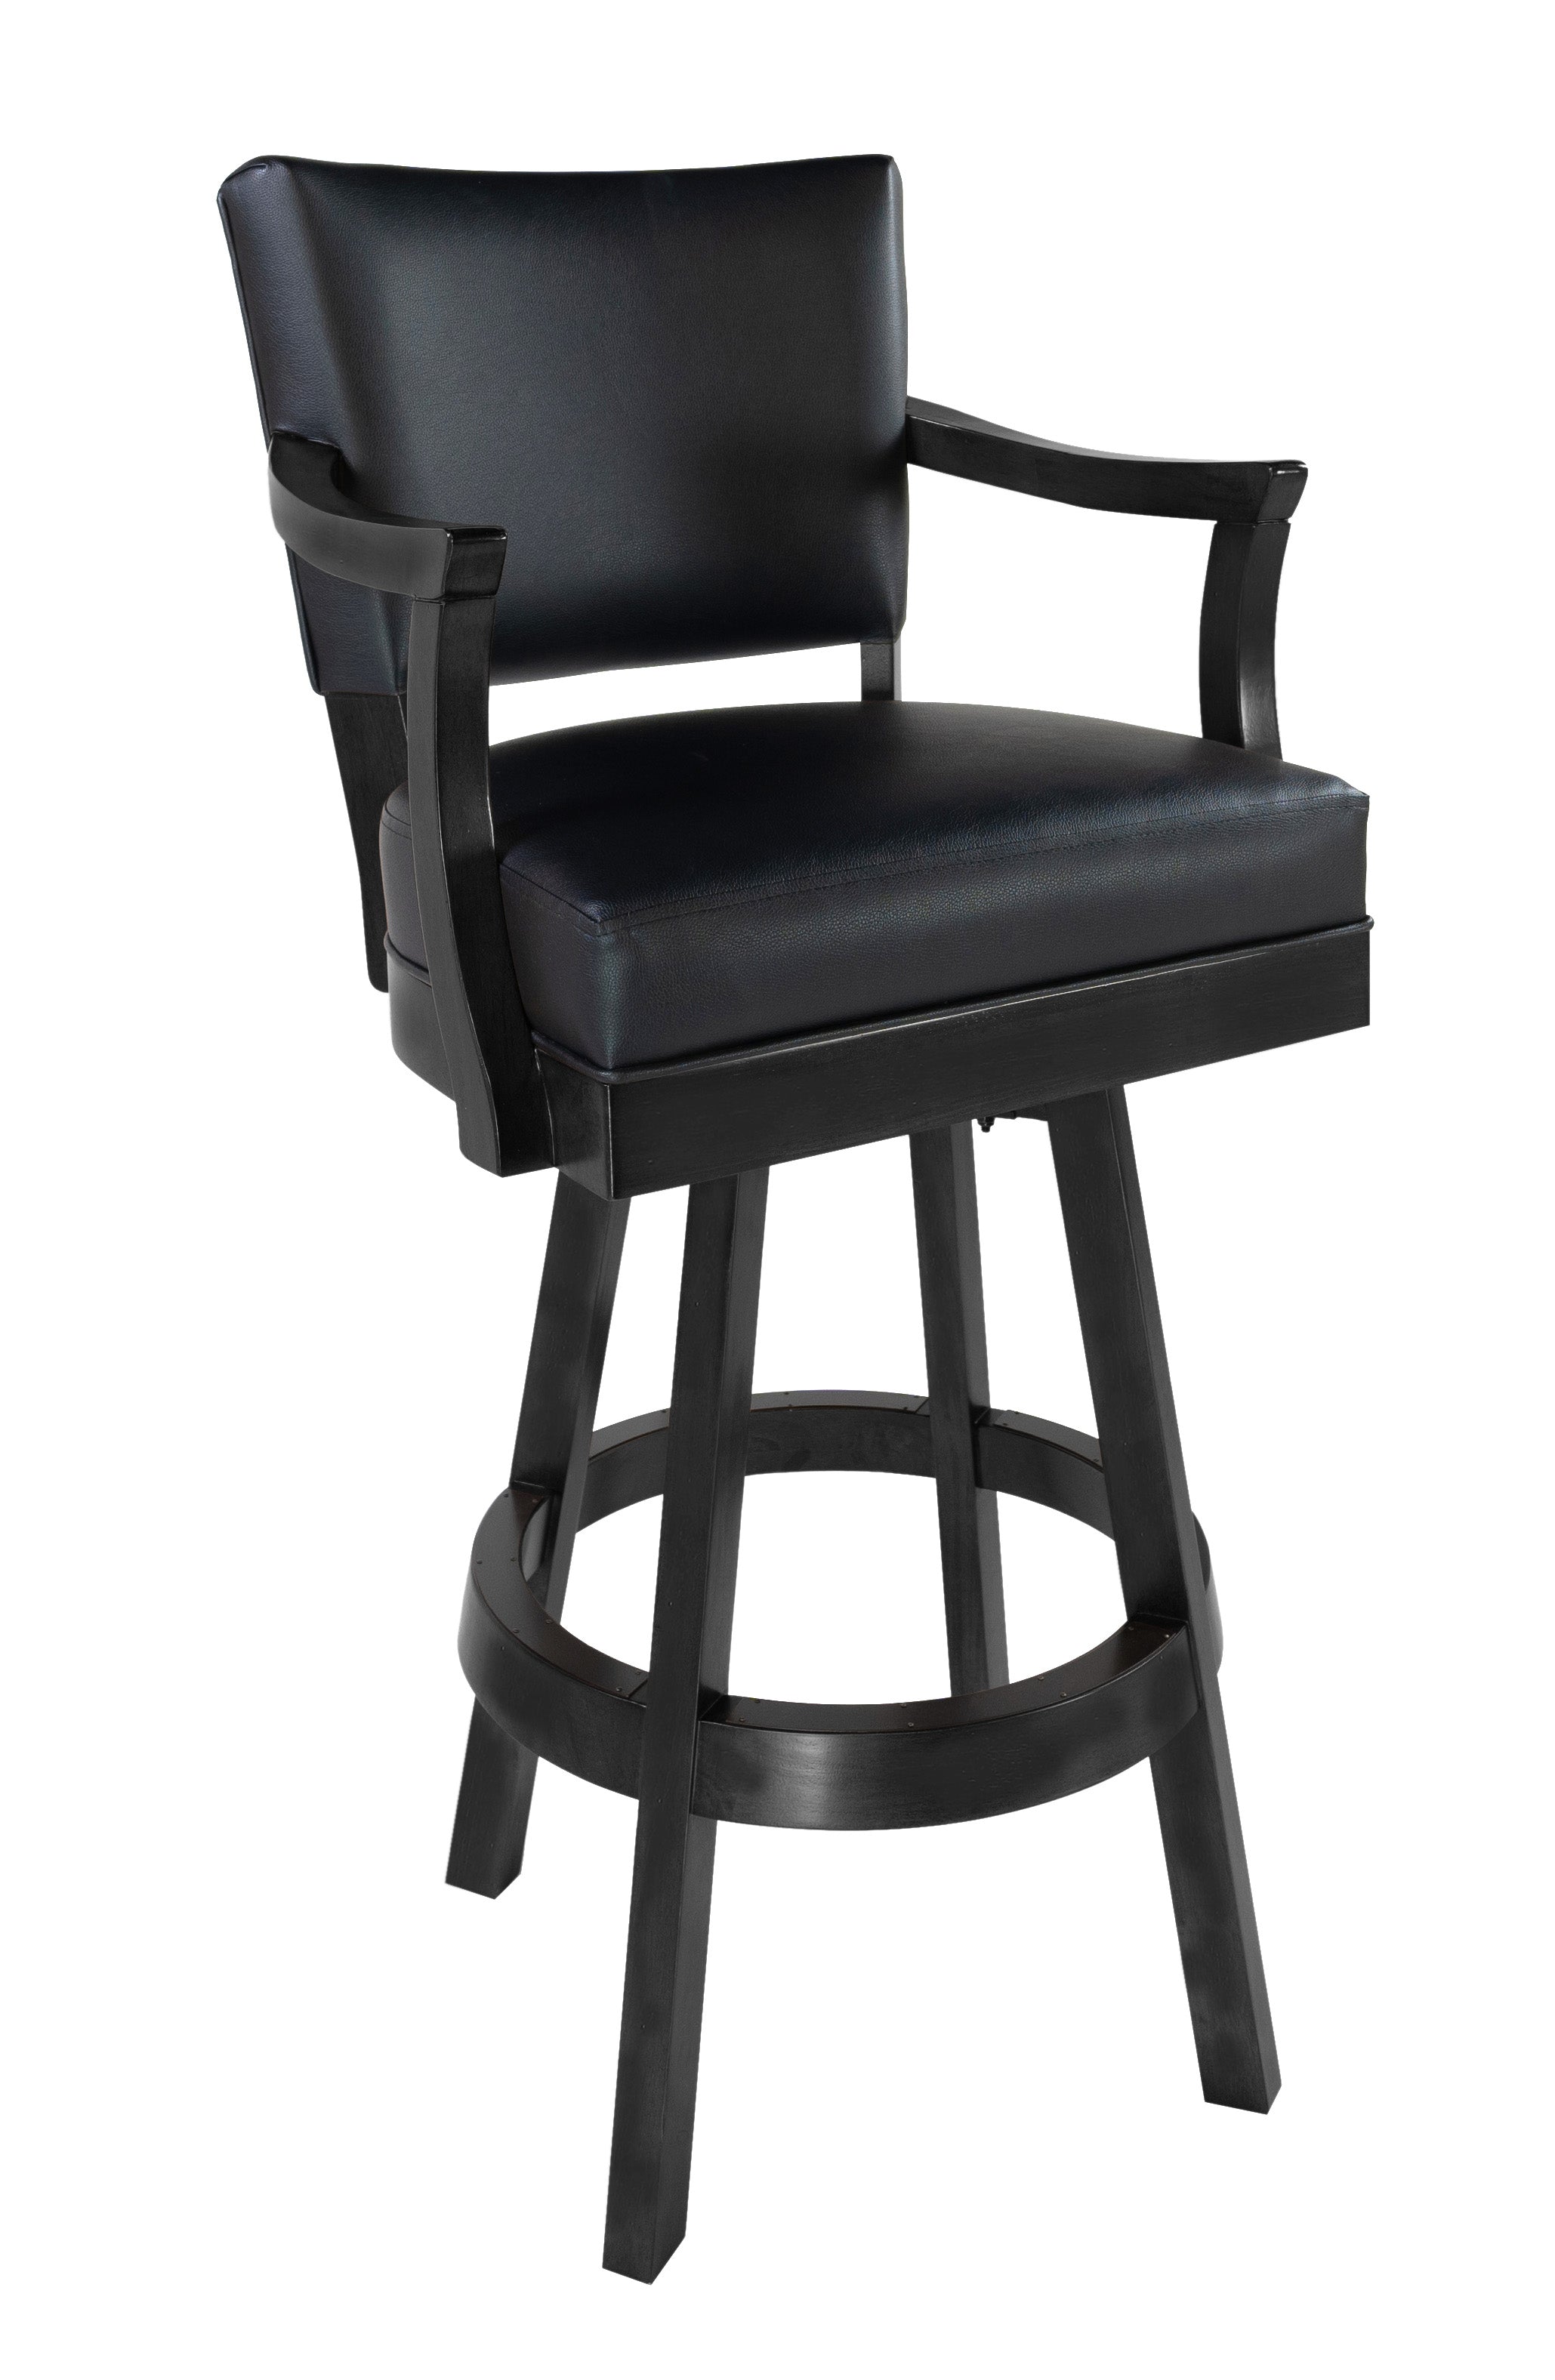 Legacy Billiards Classic Backed Barstool Straight Arm Design in Raven Finish